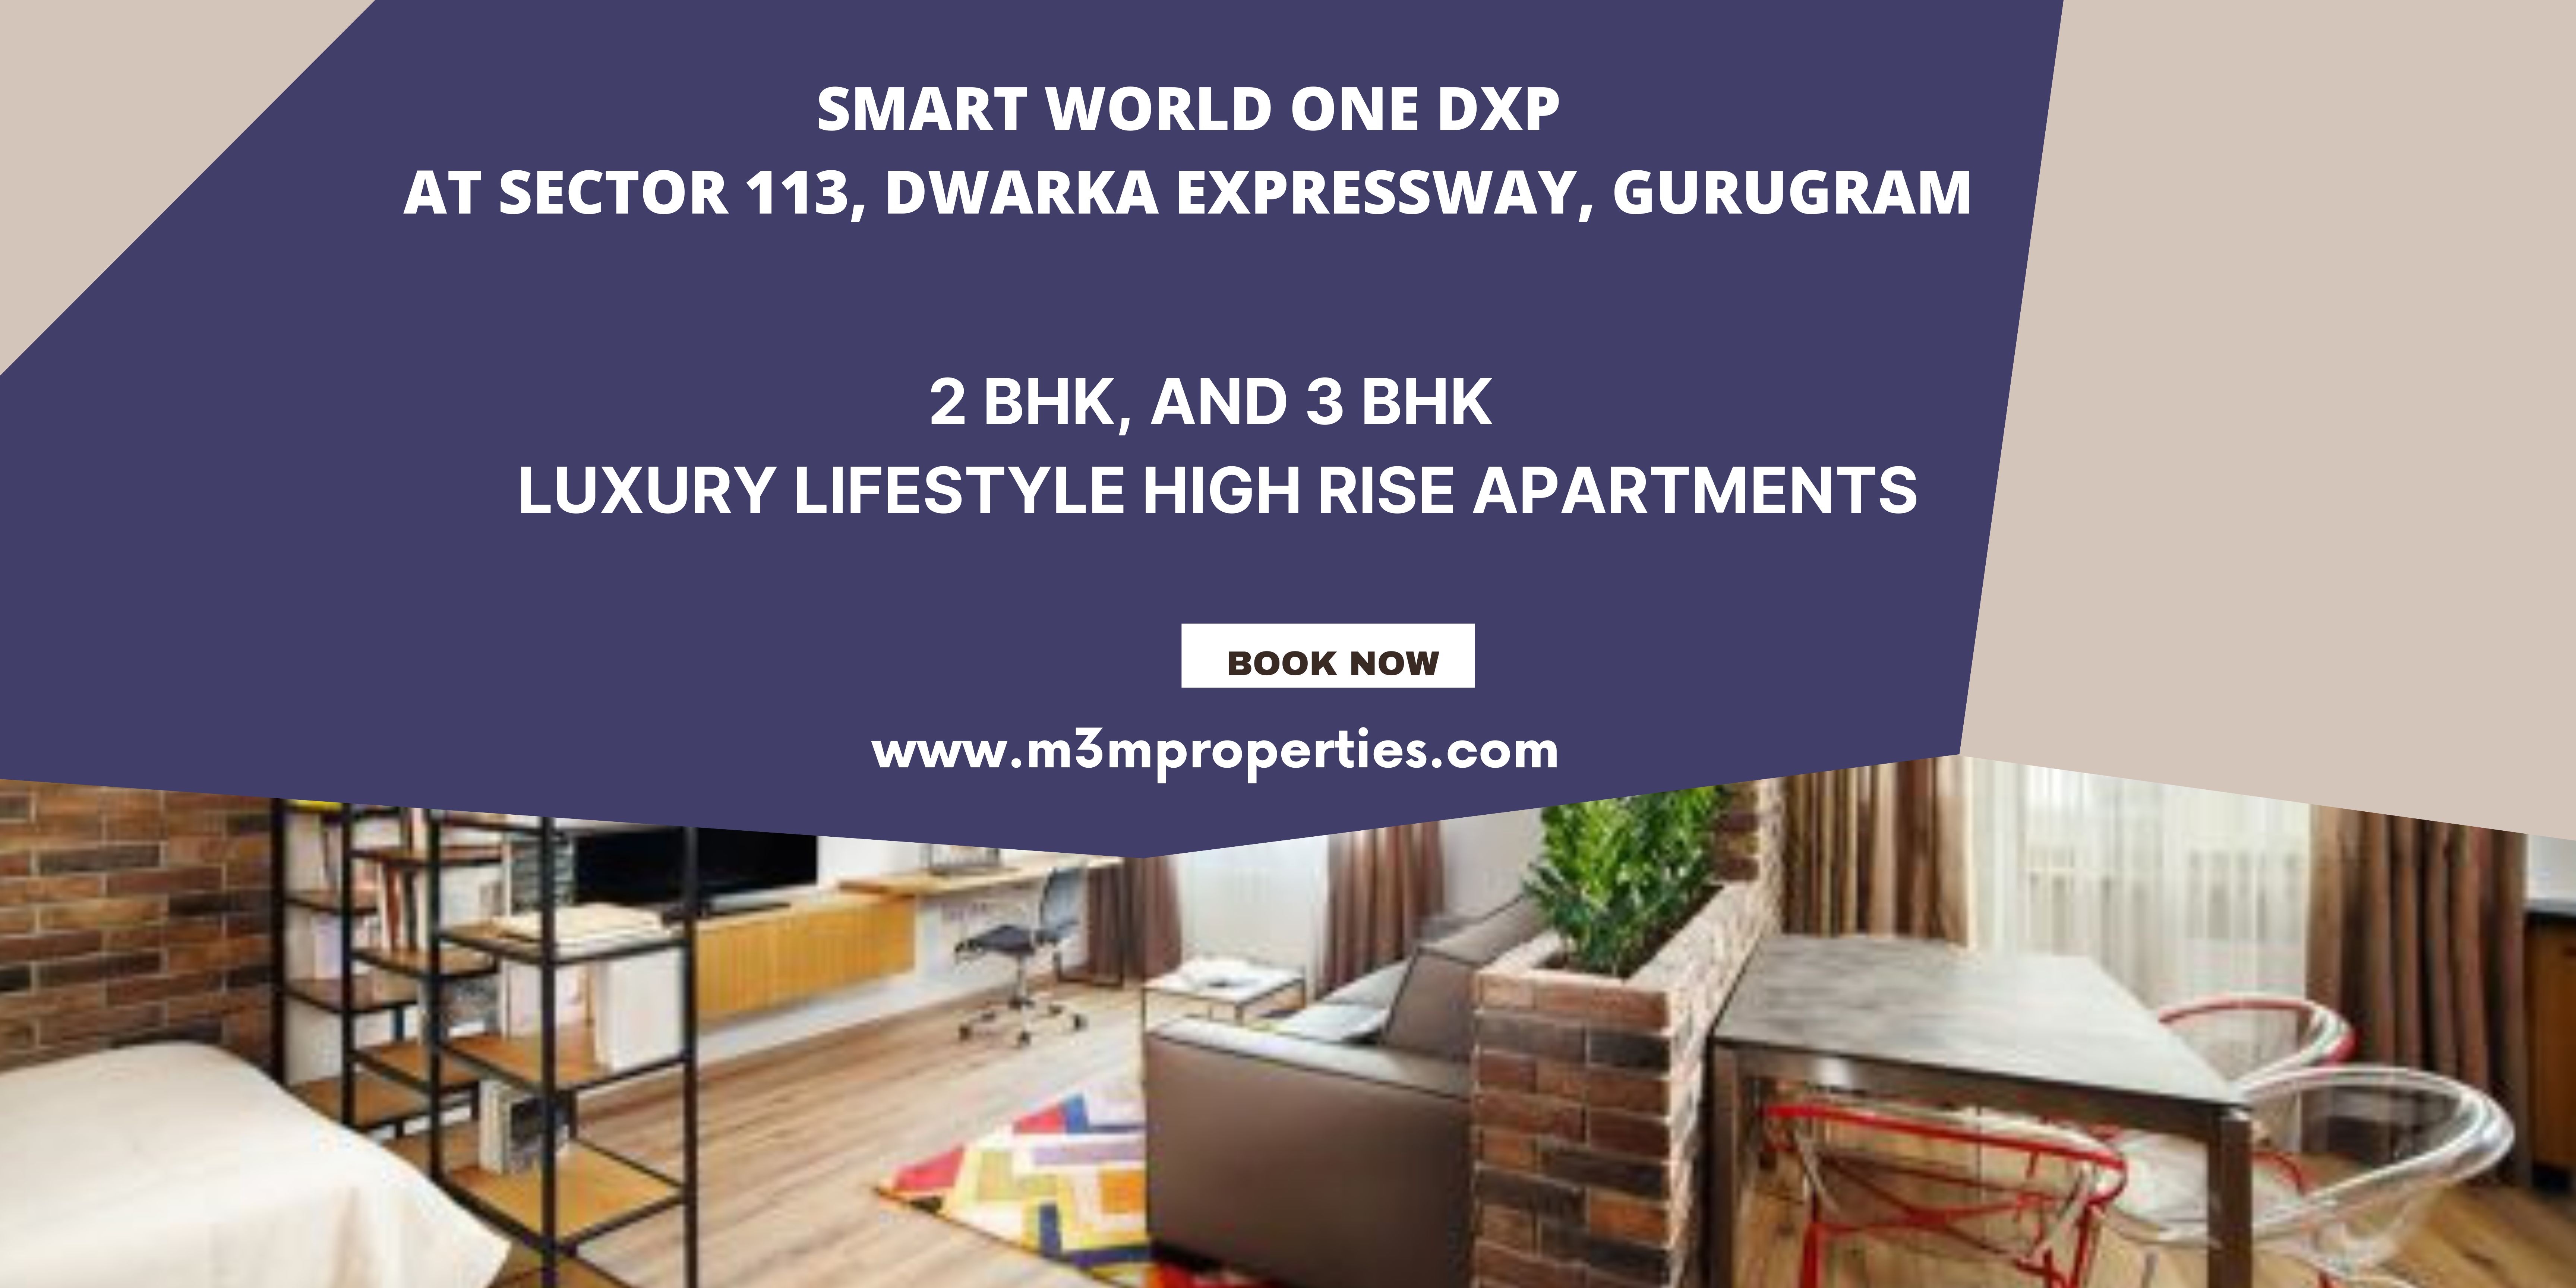 Smart World One DXP Sector 113 Gurugram | Your Concerns Are Our Priority